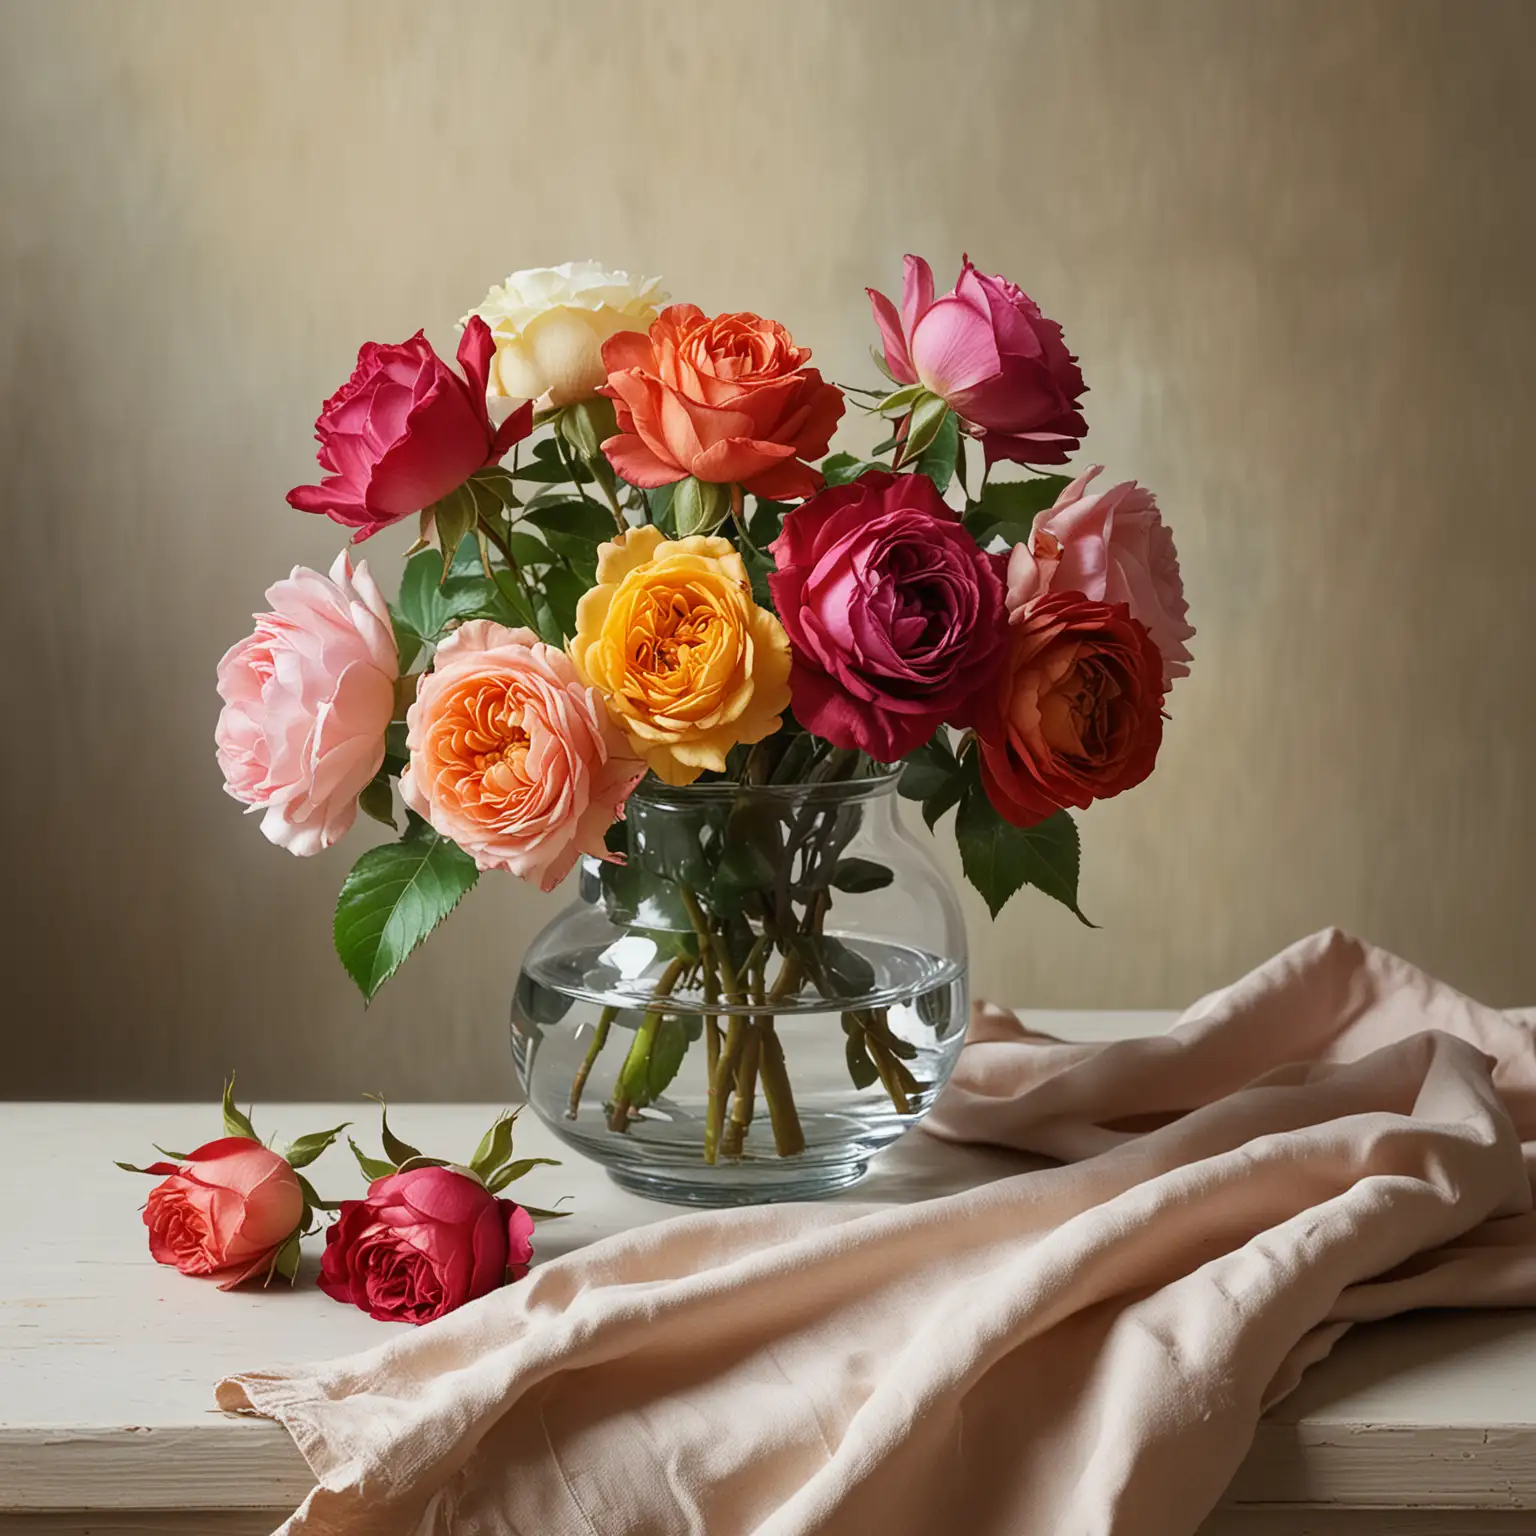 Colorful American Rose Bouquet in Glass Vase with Tablecloth